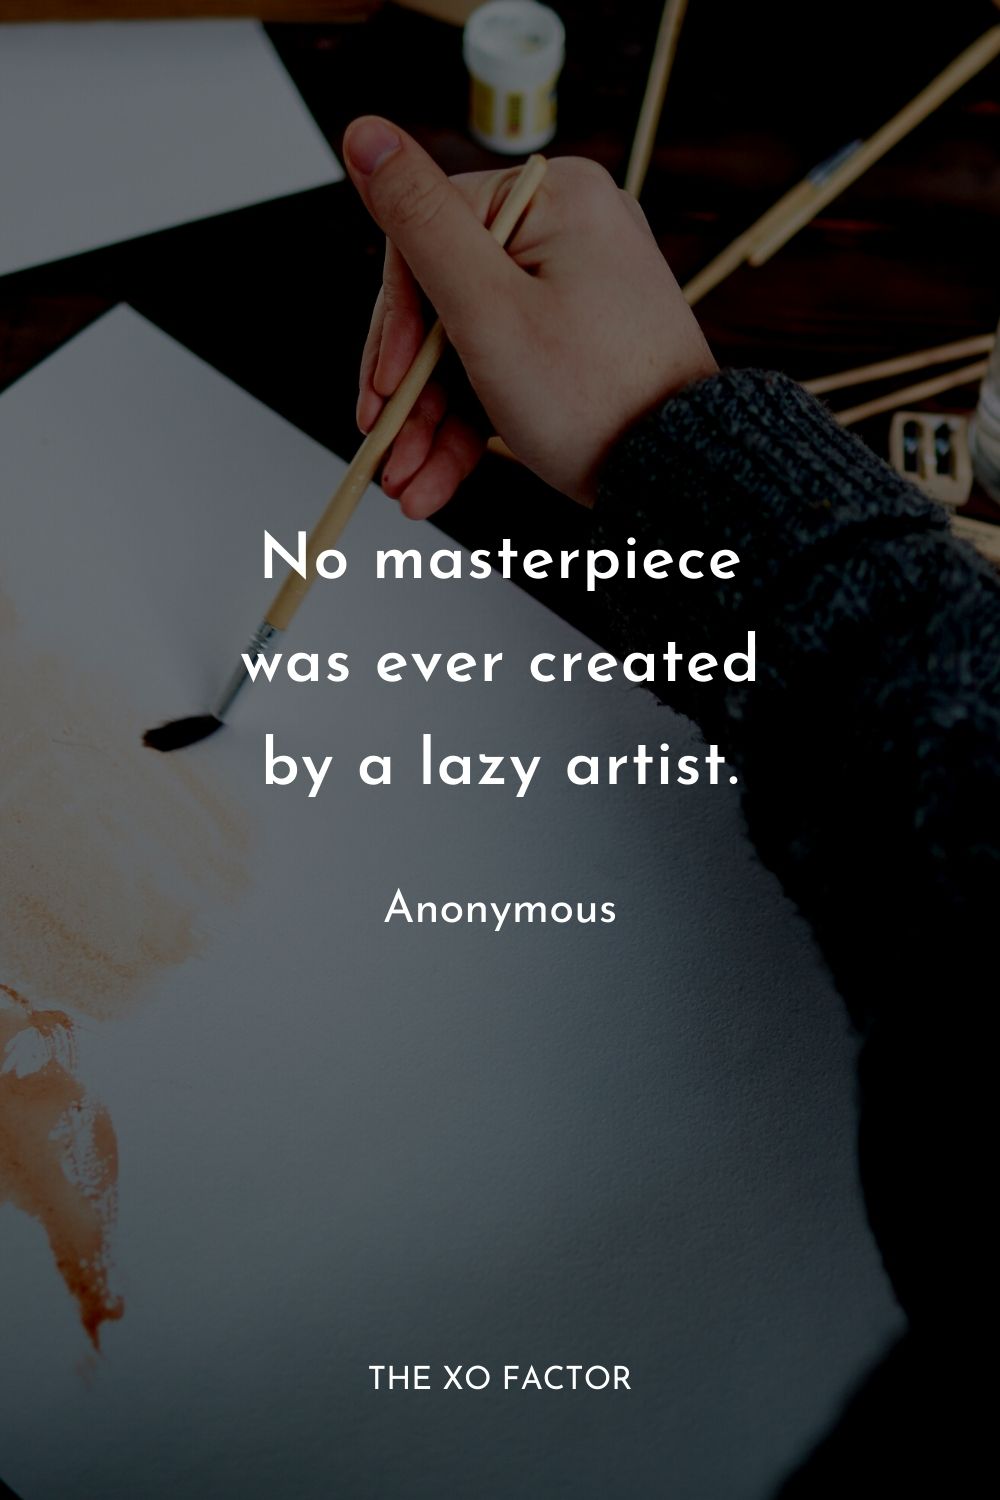 No masterpiece was ever created by a lazy artist.